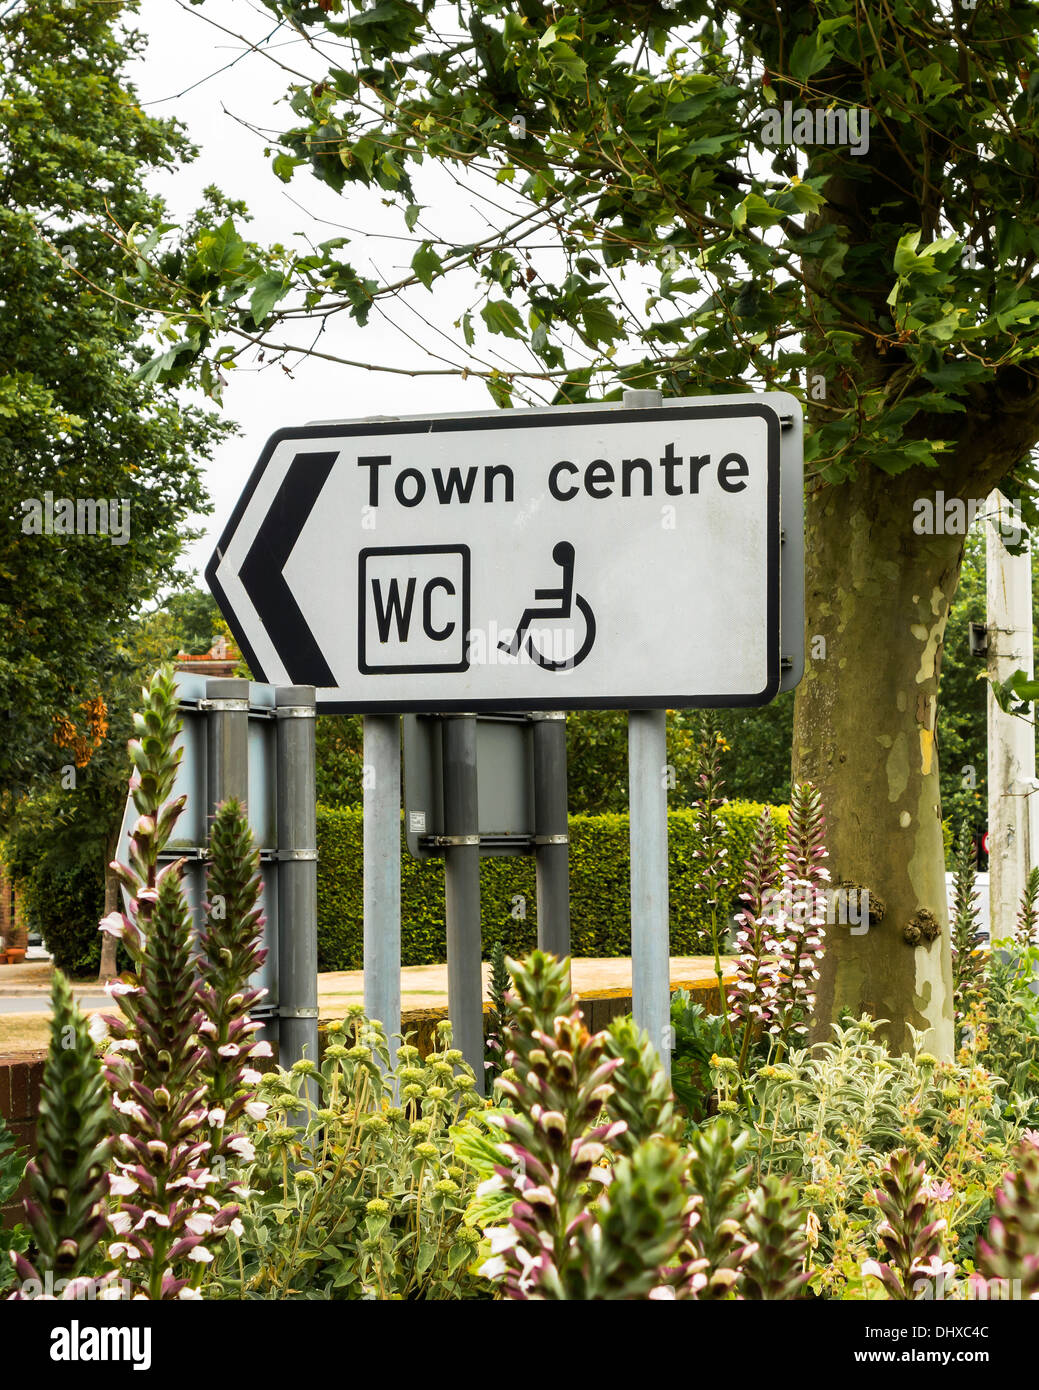 Road sign, Town Centre, WC and disabled logo (shopping, toilet and disable crossing / parking).  England, UK Stock Photo